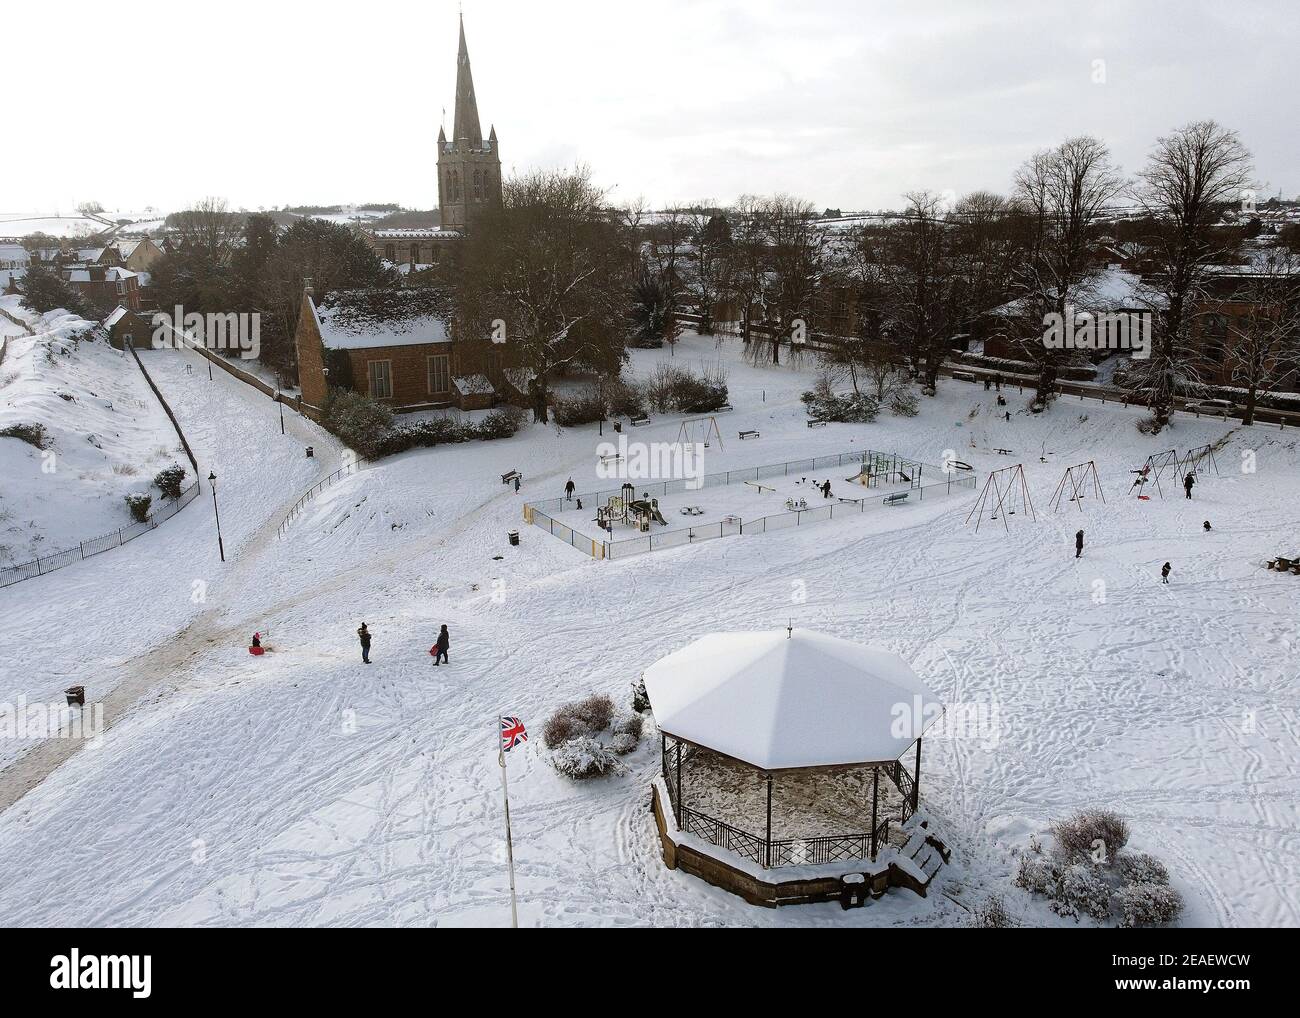 Oakham, Rutland, UK. 9th February 2021. UK weather. The Union flag flies next to the bandstand in Cutts Close Park as the temperature in the UK plummeted to its lowest in a decade. Credit Darren Staples/Alamy Live News. Stock Photo